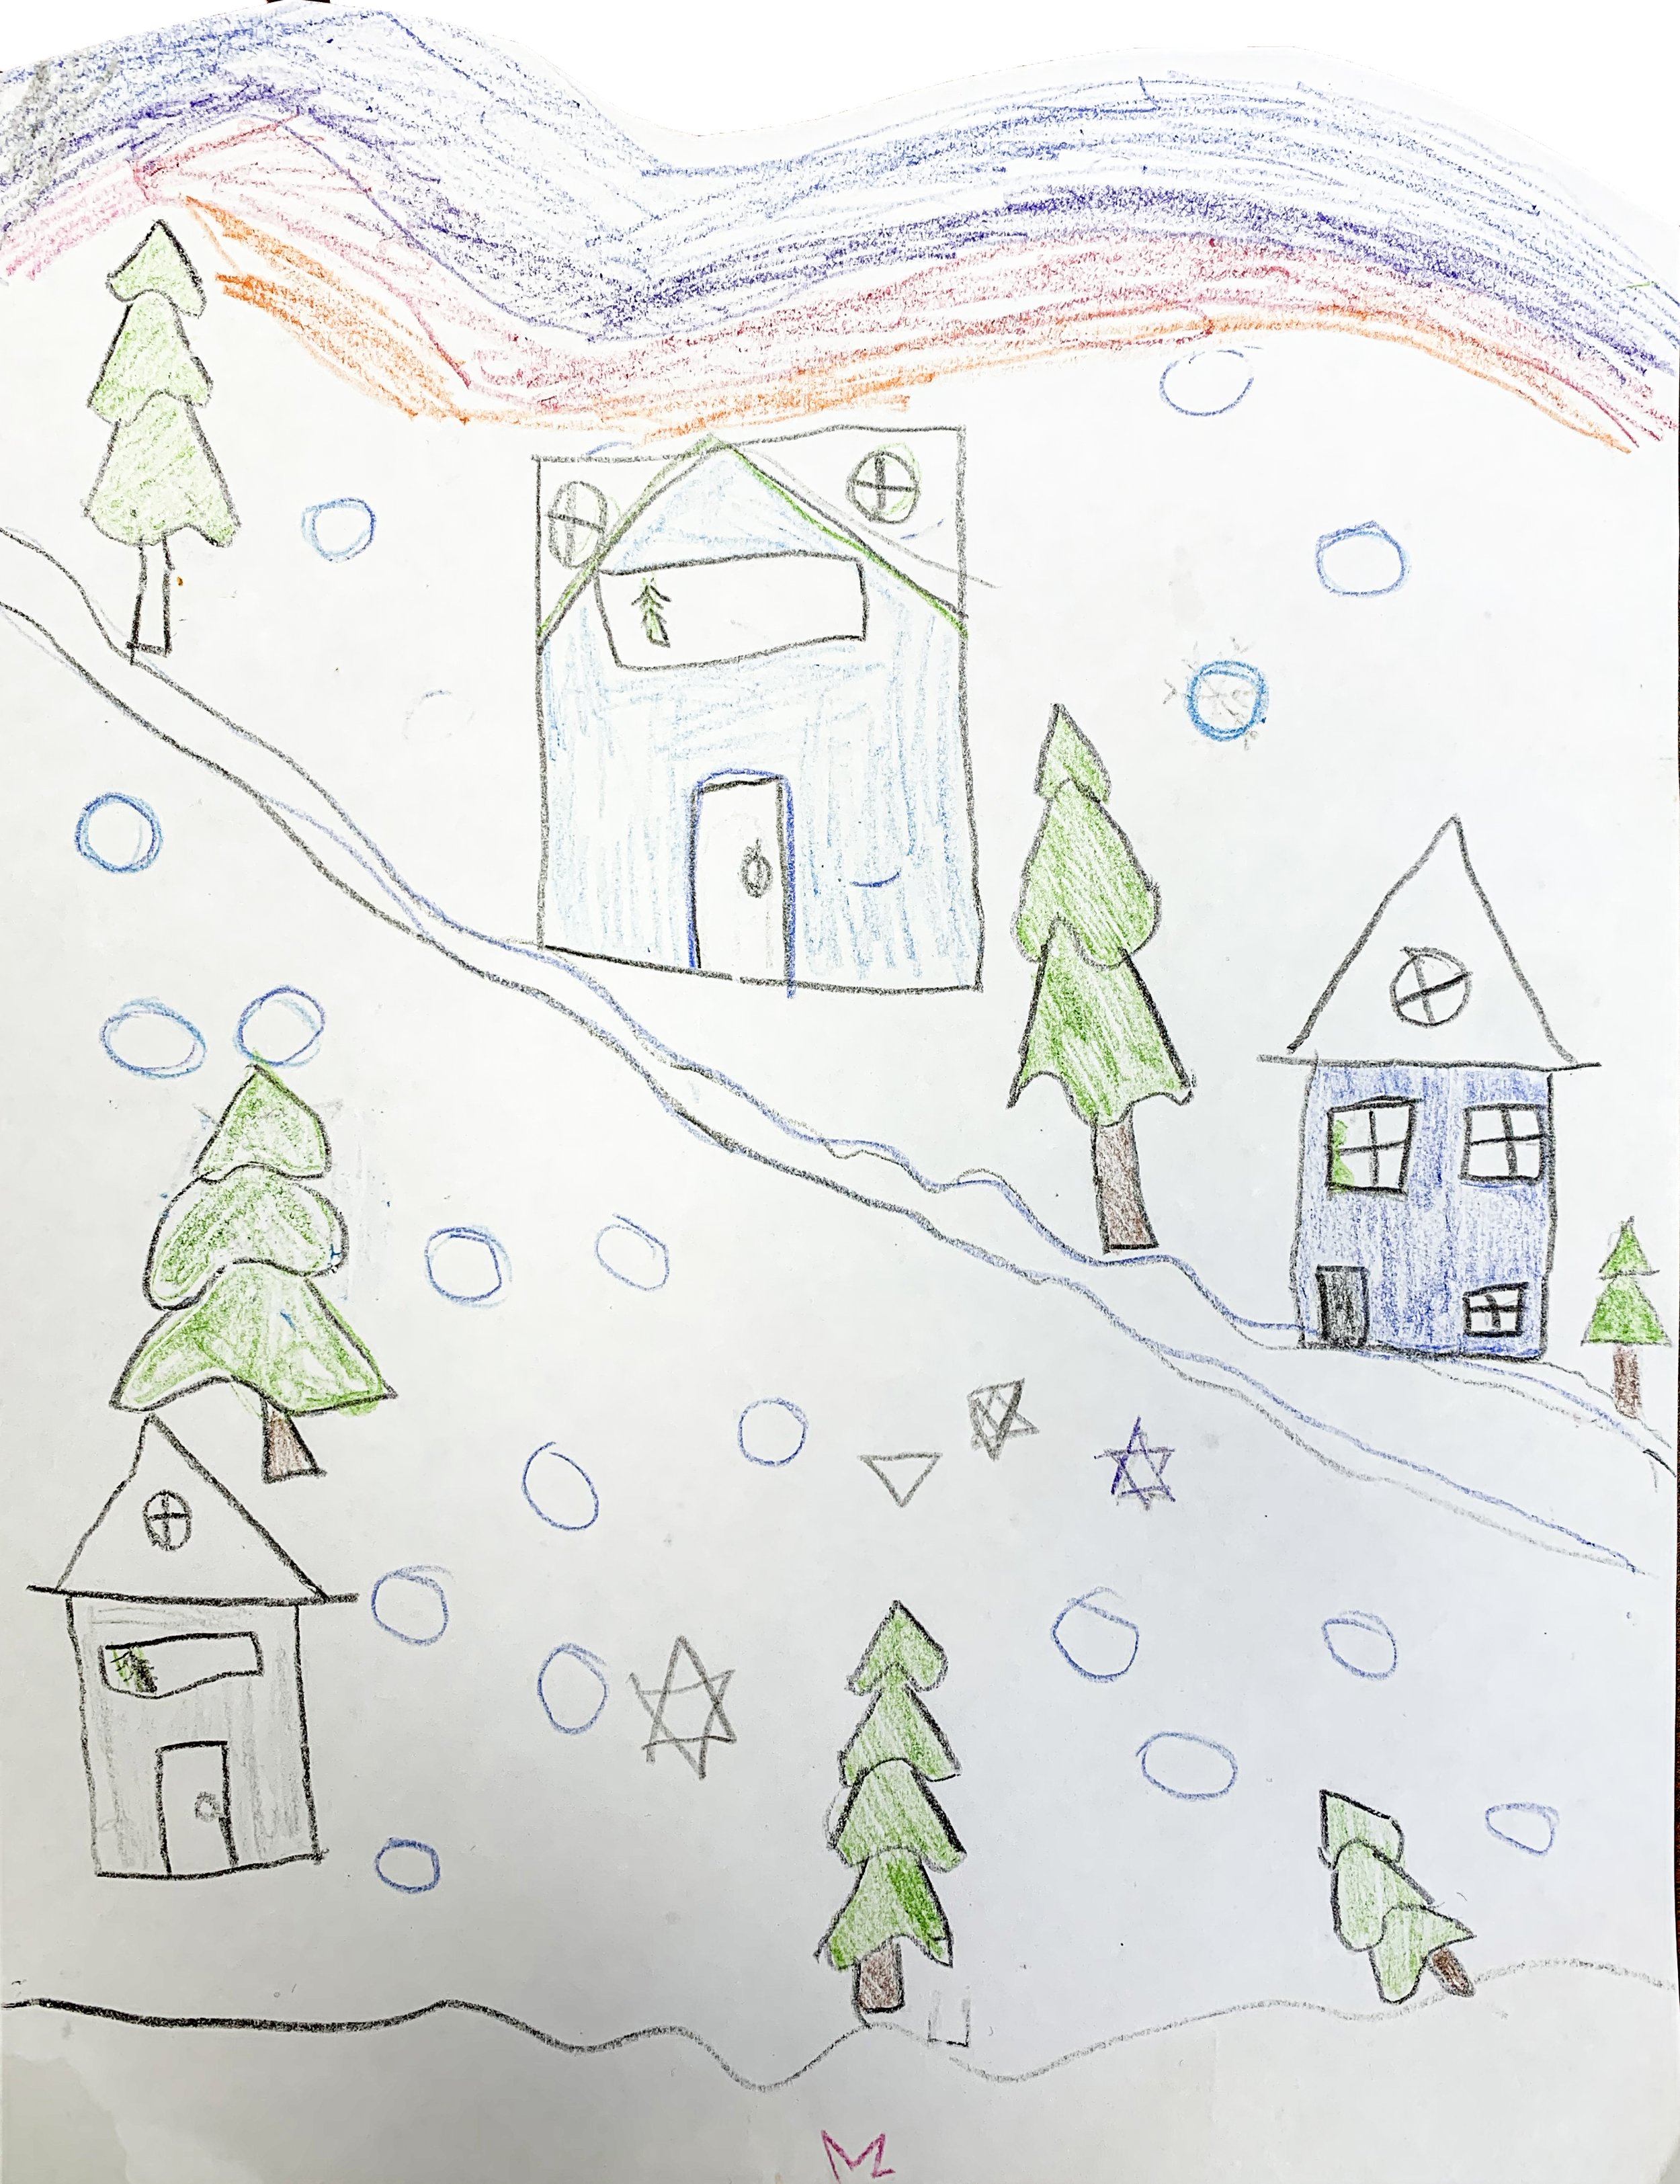 Artwork by Jace, Age 8 from Fredericton